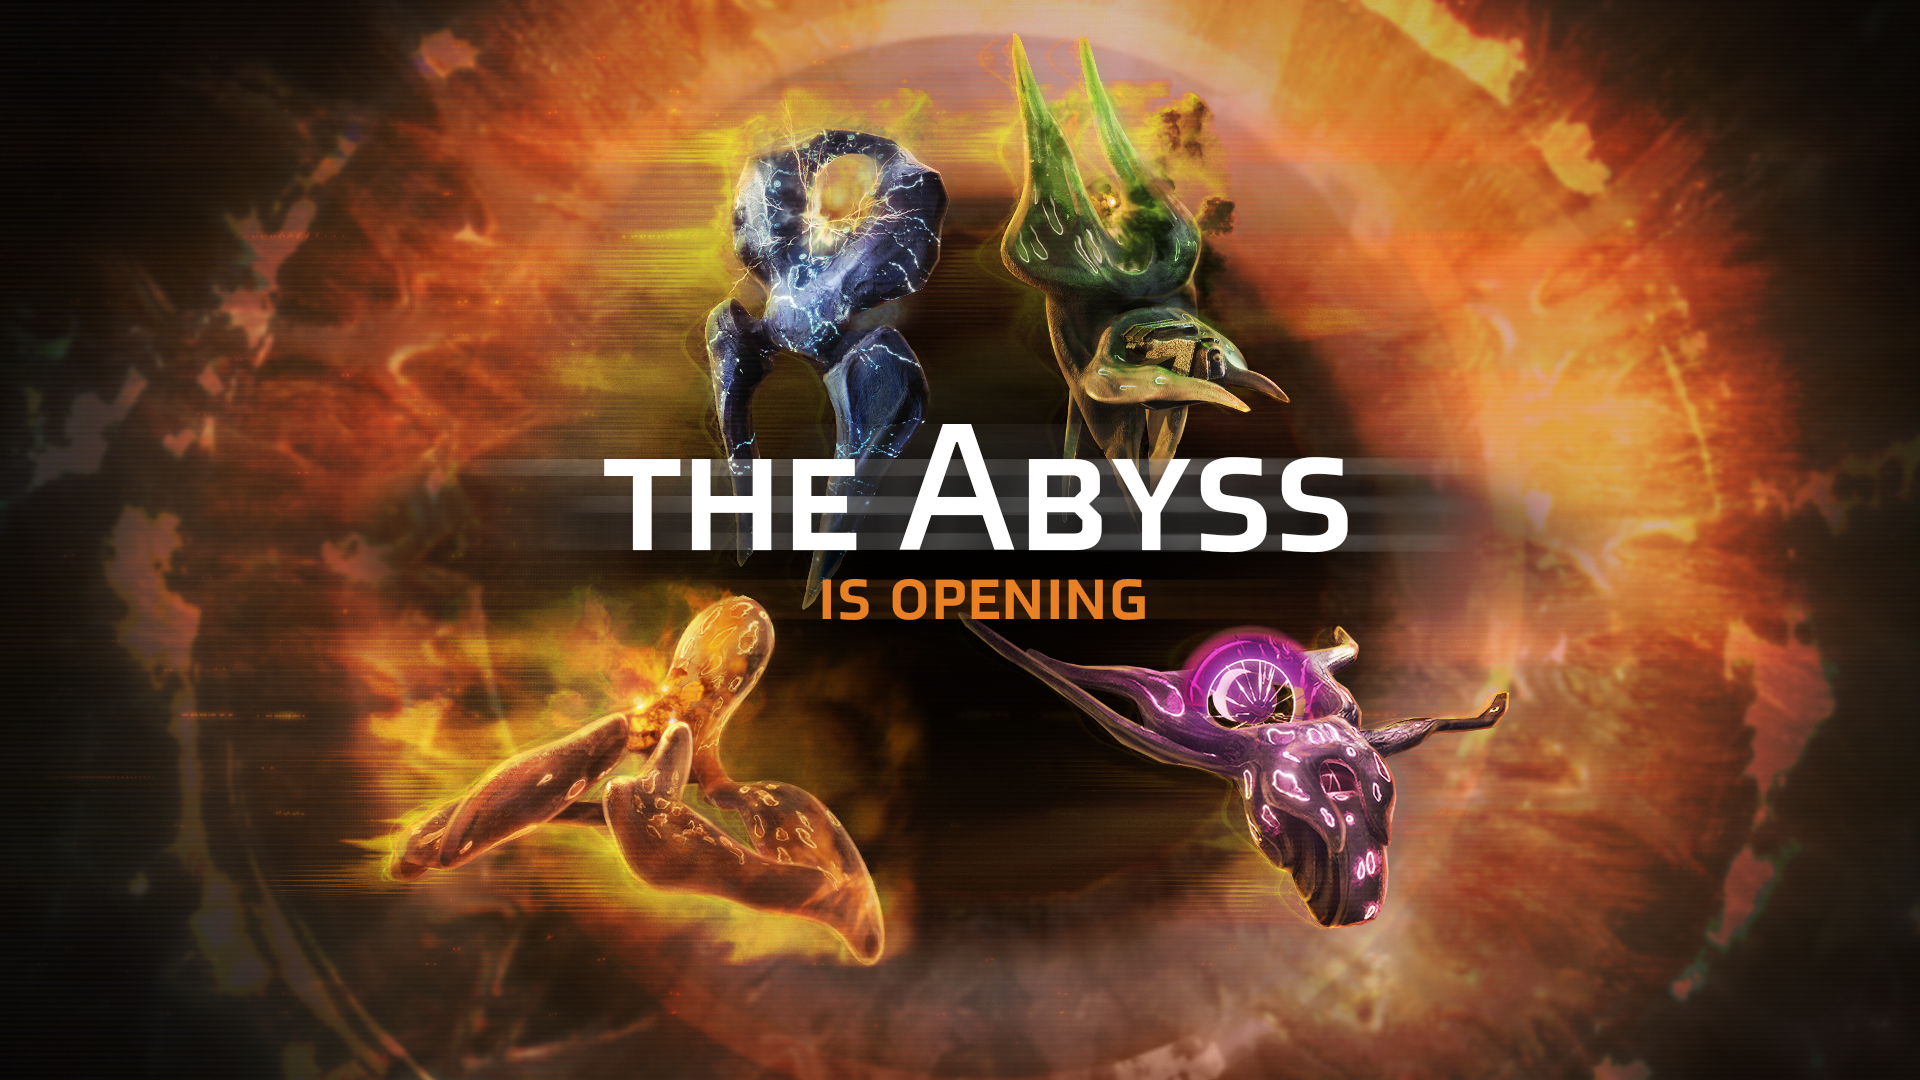 Dive into The Abyss today!